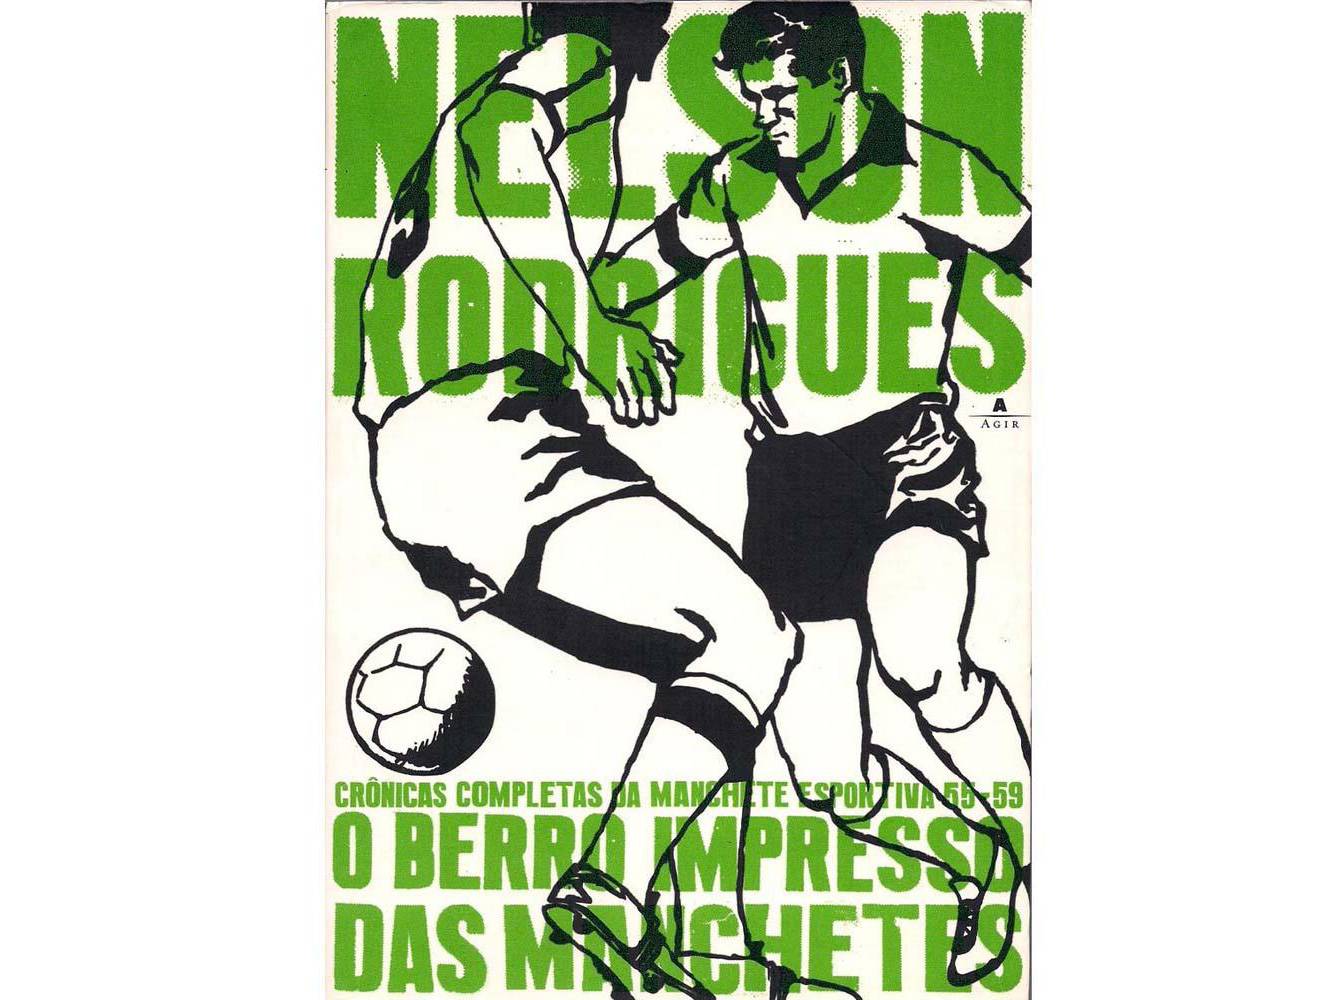 Nelson Rodrigues